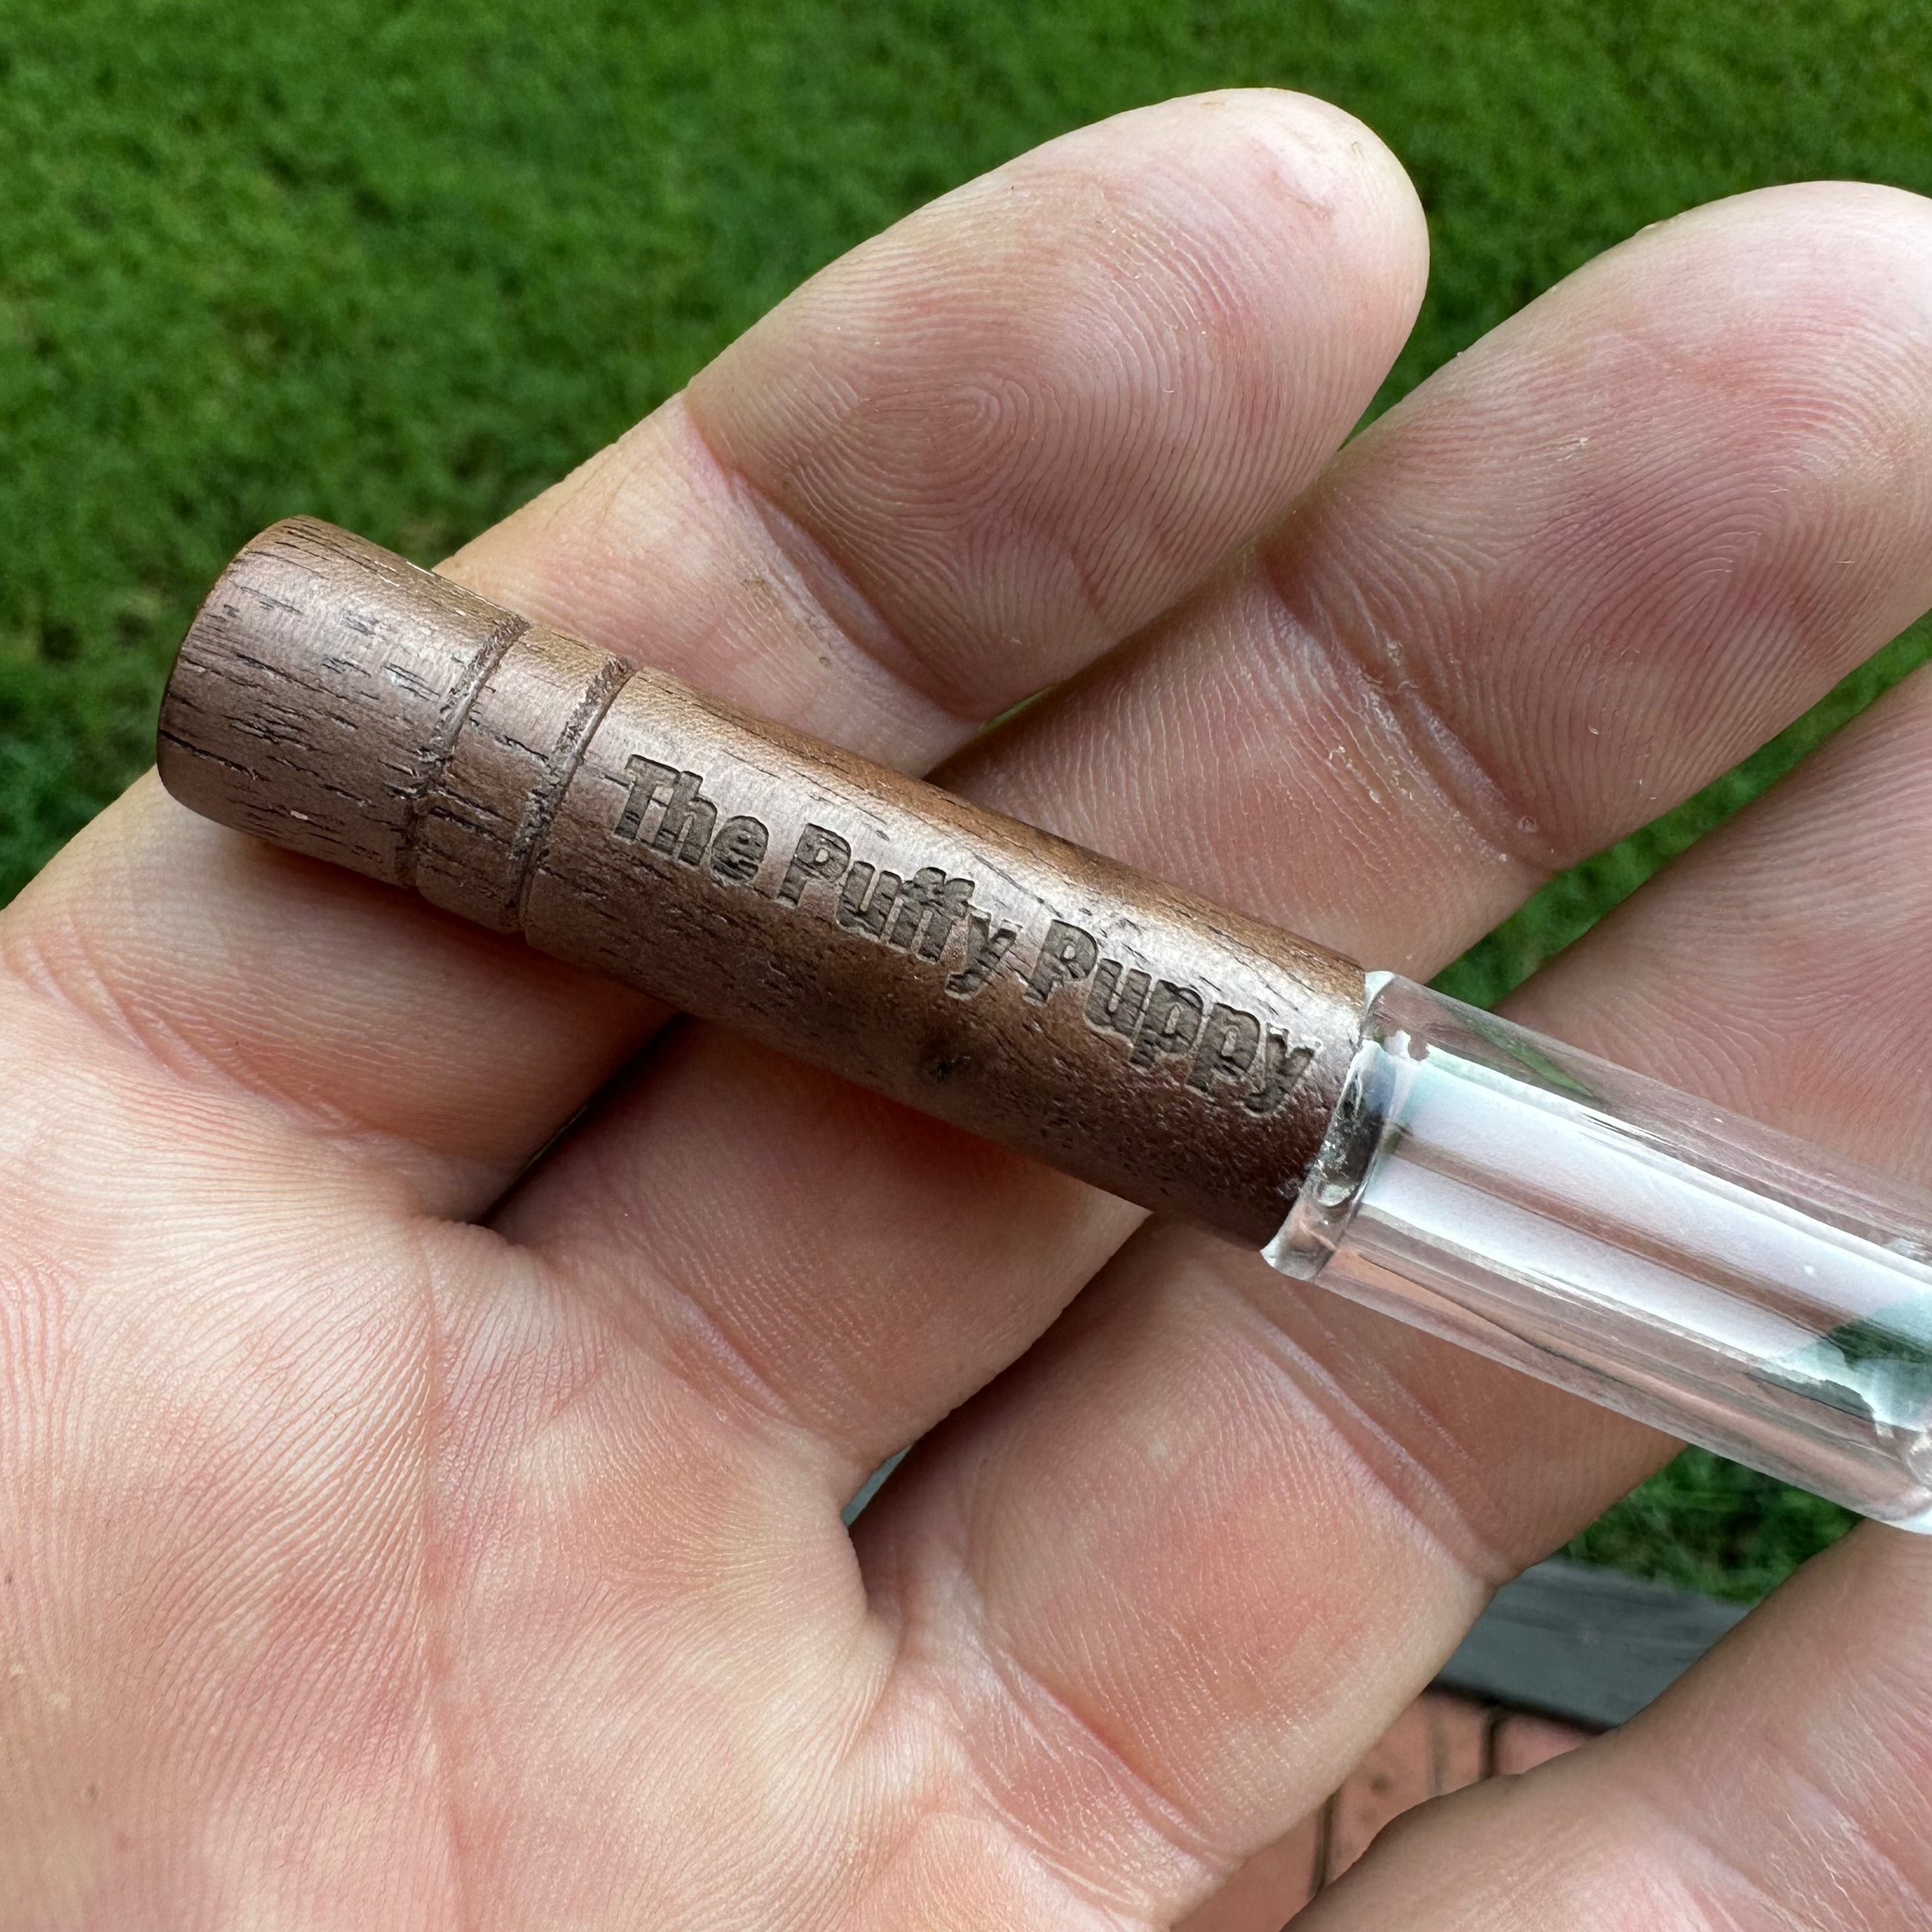 Engraved tobacco glass pipe taster.